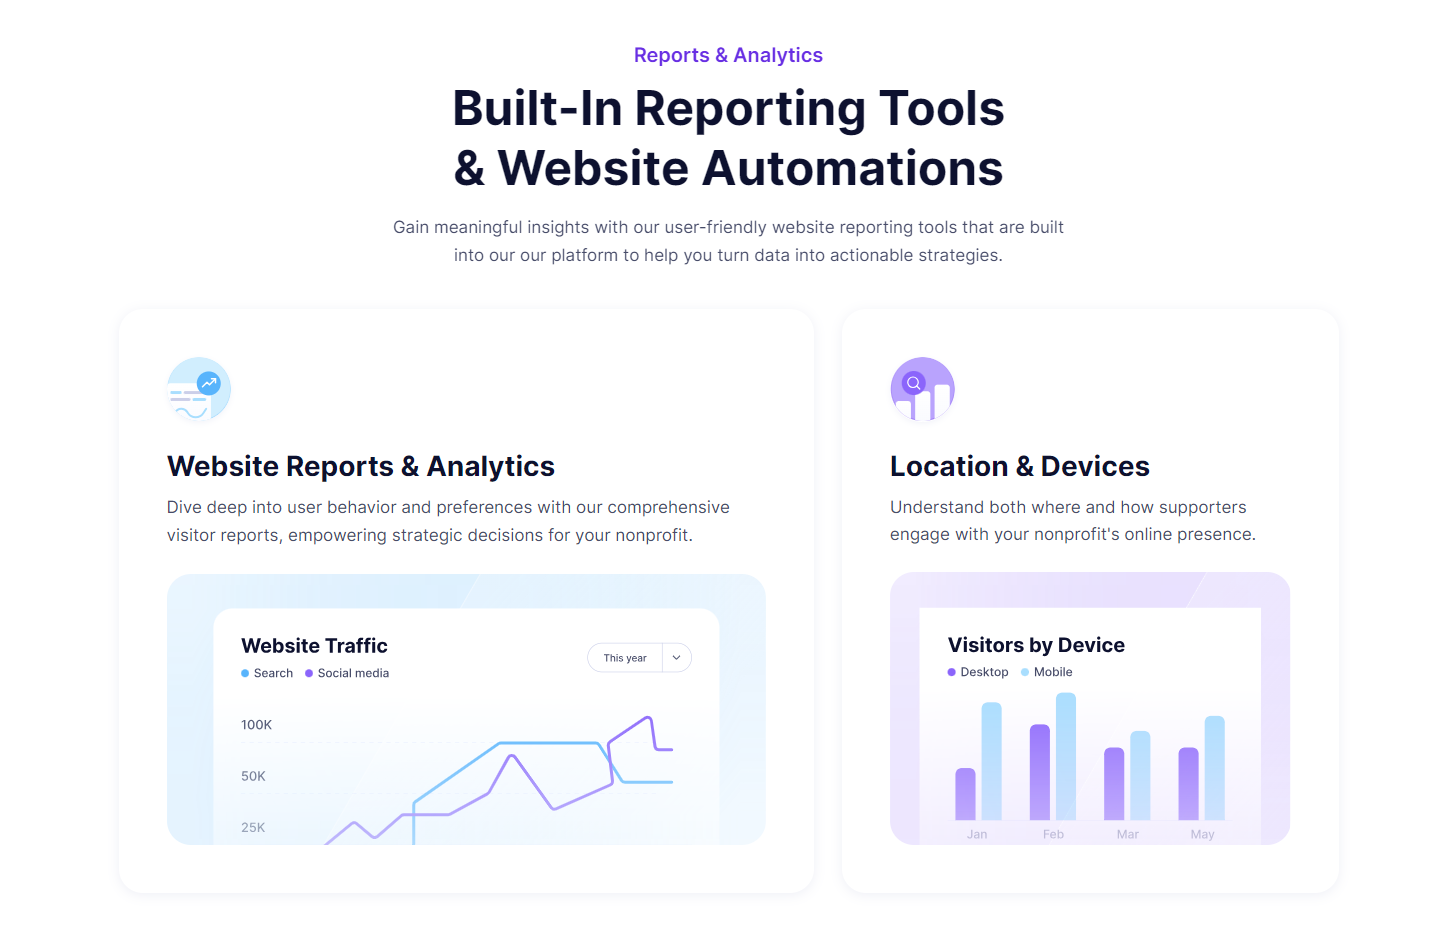 Built-In Reporting Tools & Website Automations